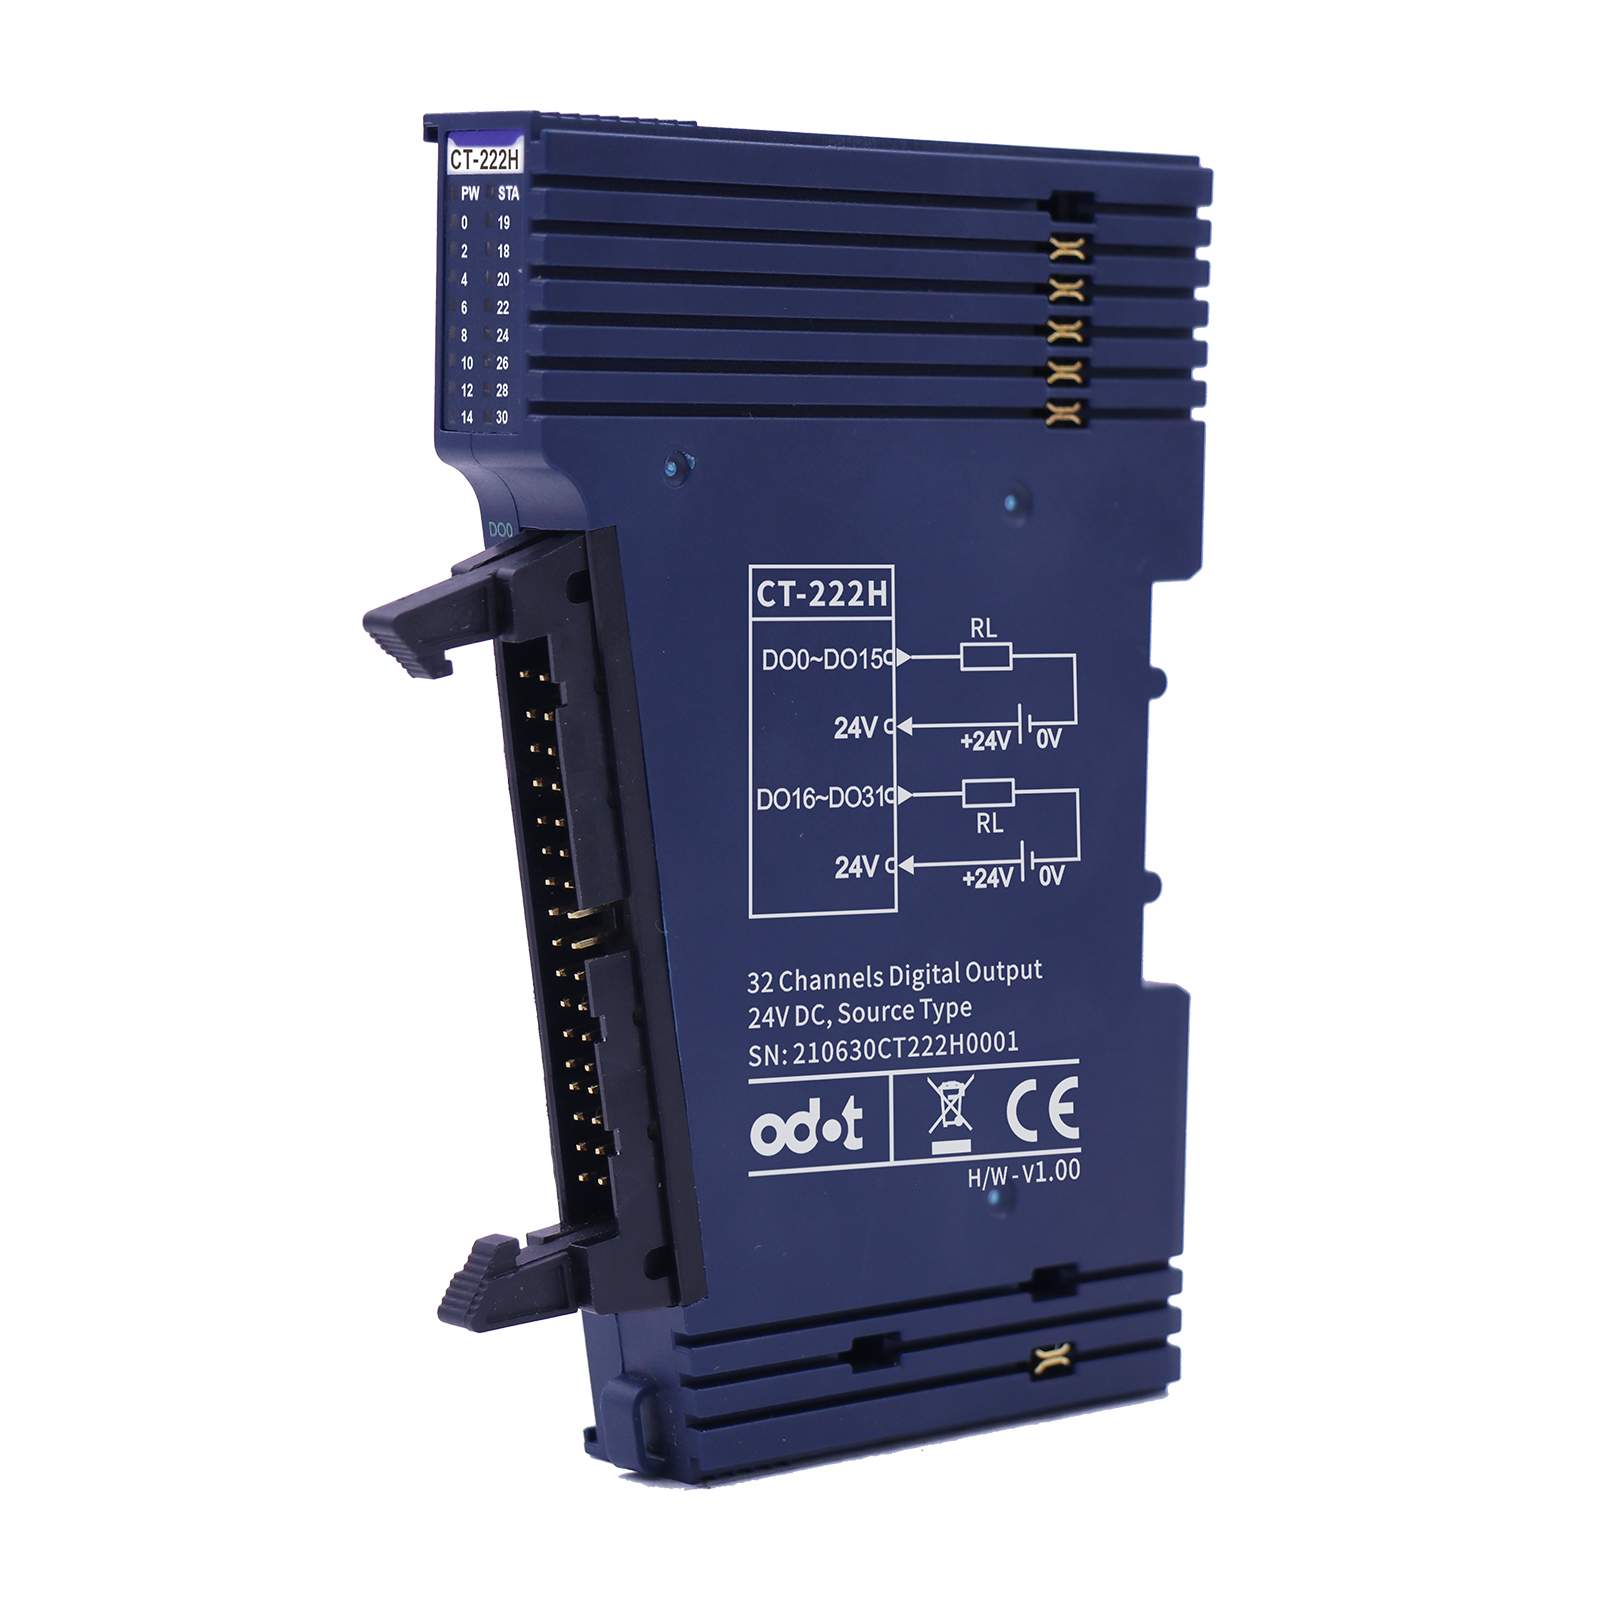 Cheap PriceList for Modbus Tcp Ip Schneider - CT-222H: 32 channels digital output, source, 24Vdc/0.5A，34Pin male connector – ODOT